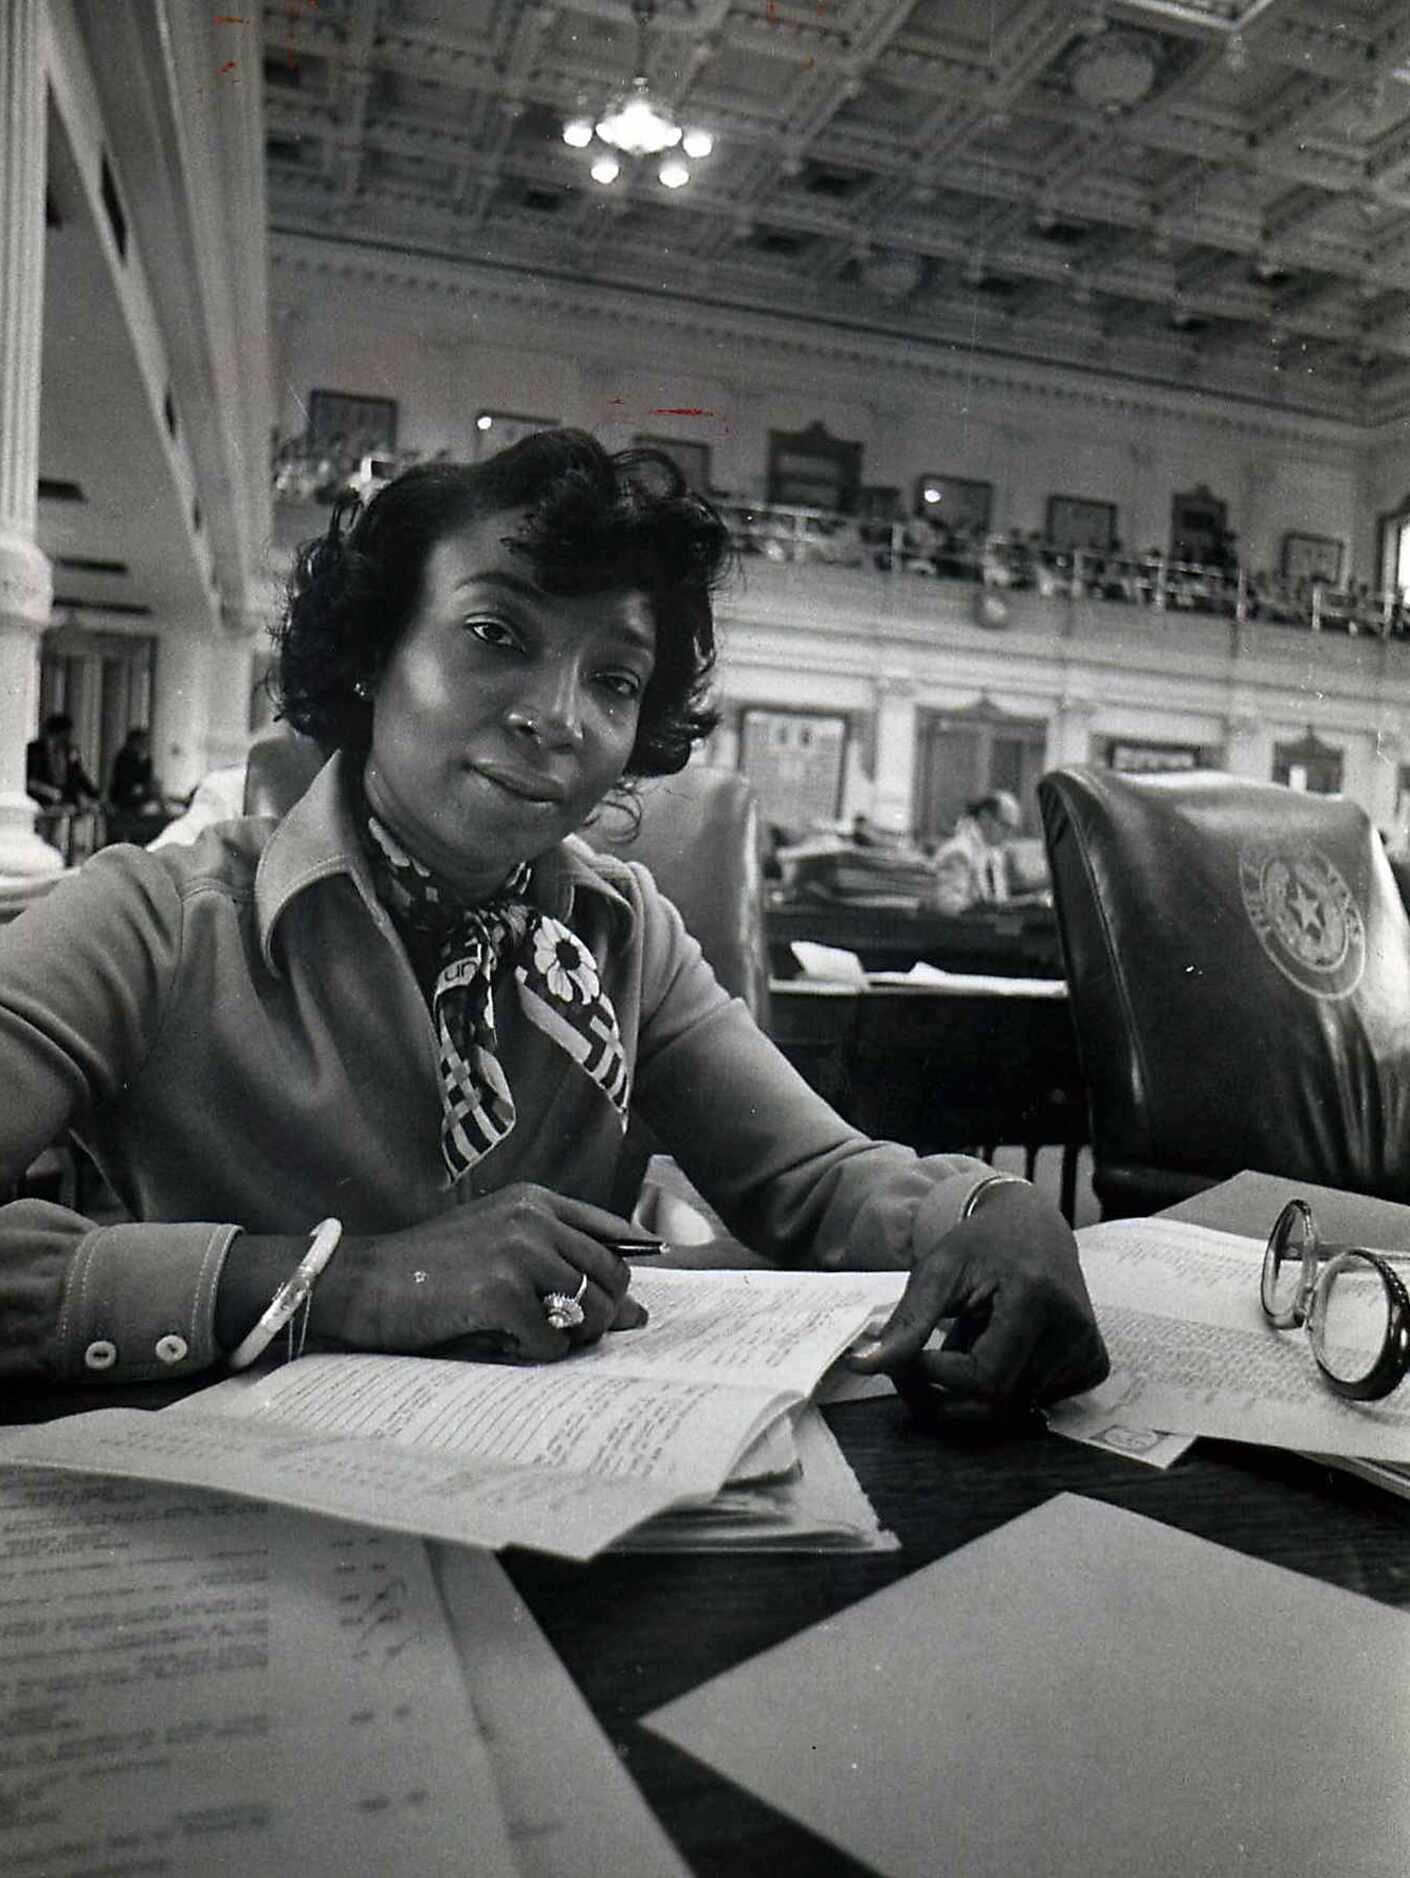 State Rep. Eddie Bernice Johnson pictured in in the Texas House circa 1974.